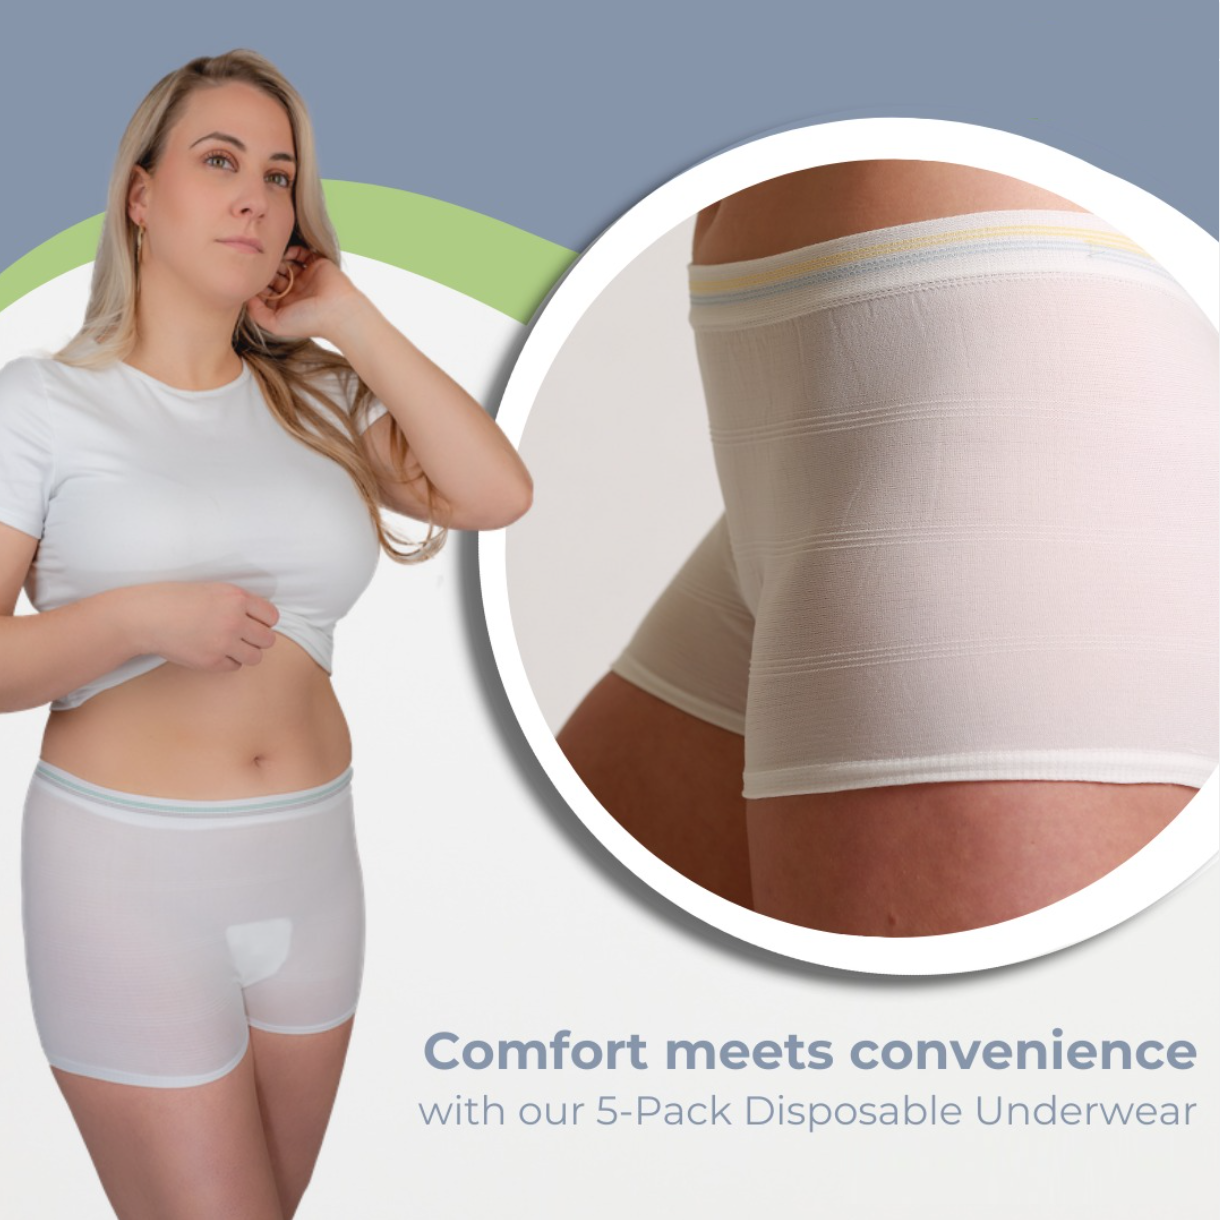 5-pack Disposable, Postpartum and Incontinence Underwear (Case of 20 packs)